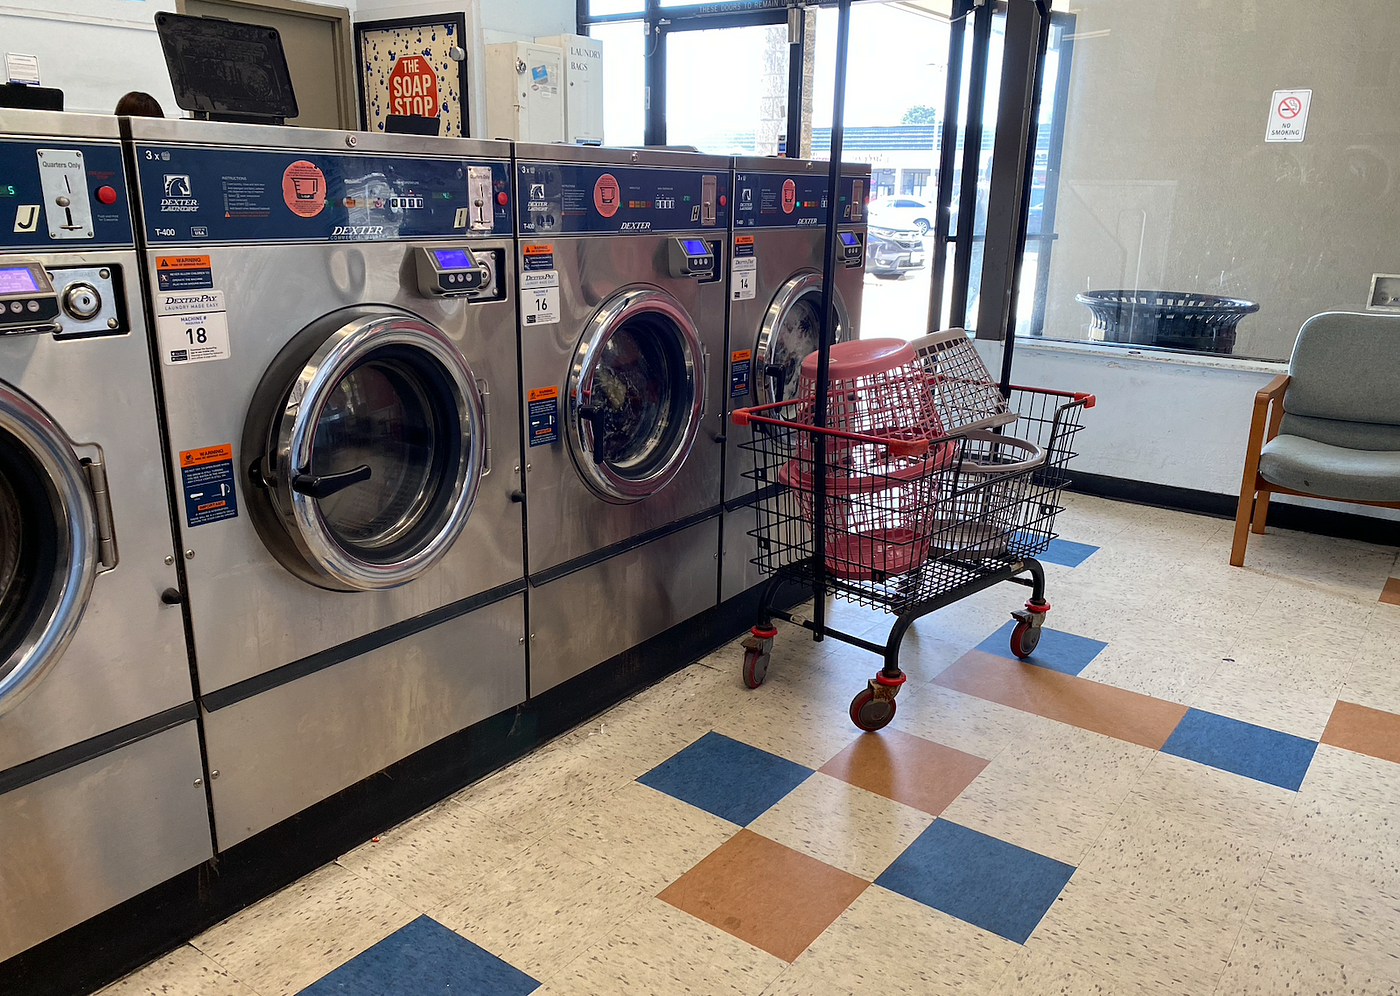 Day 19: Leave Detergent and Quarters at the Laundromat